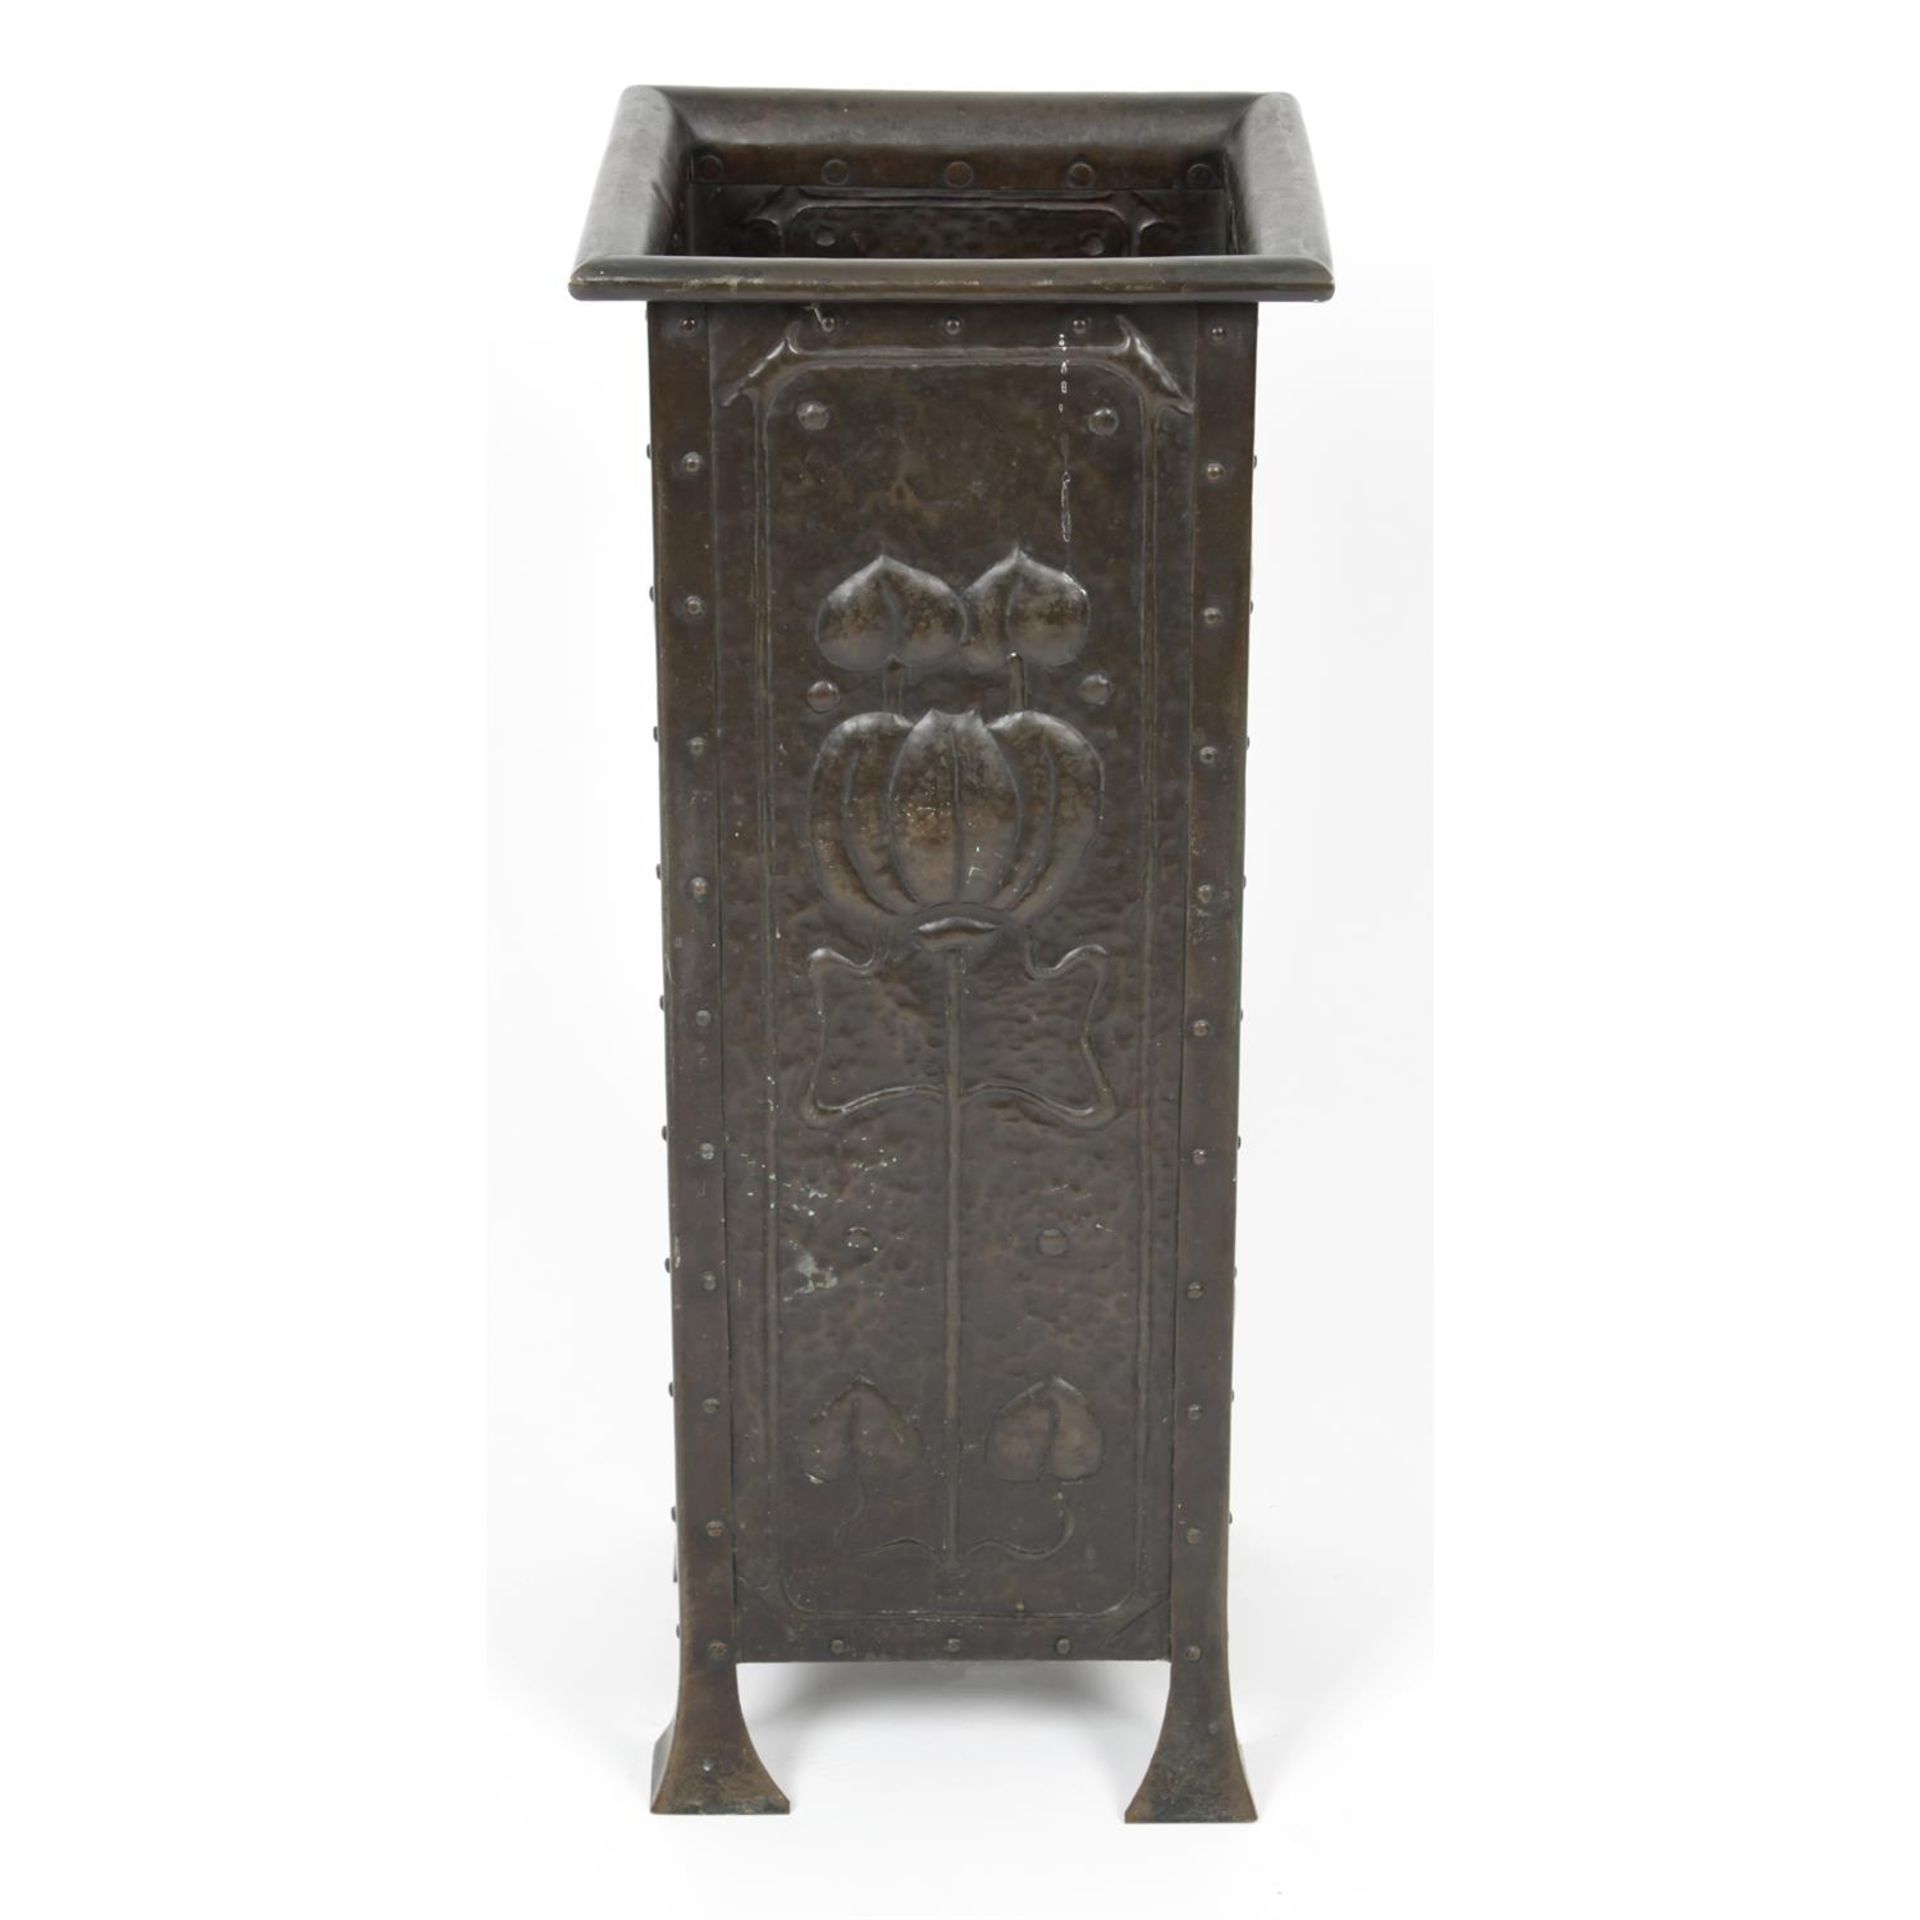 An early 20th century Arts & Crafts patinated copper stick or umbrella stand.